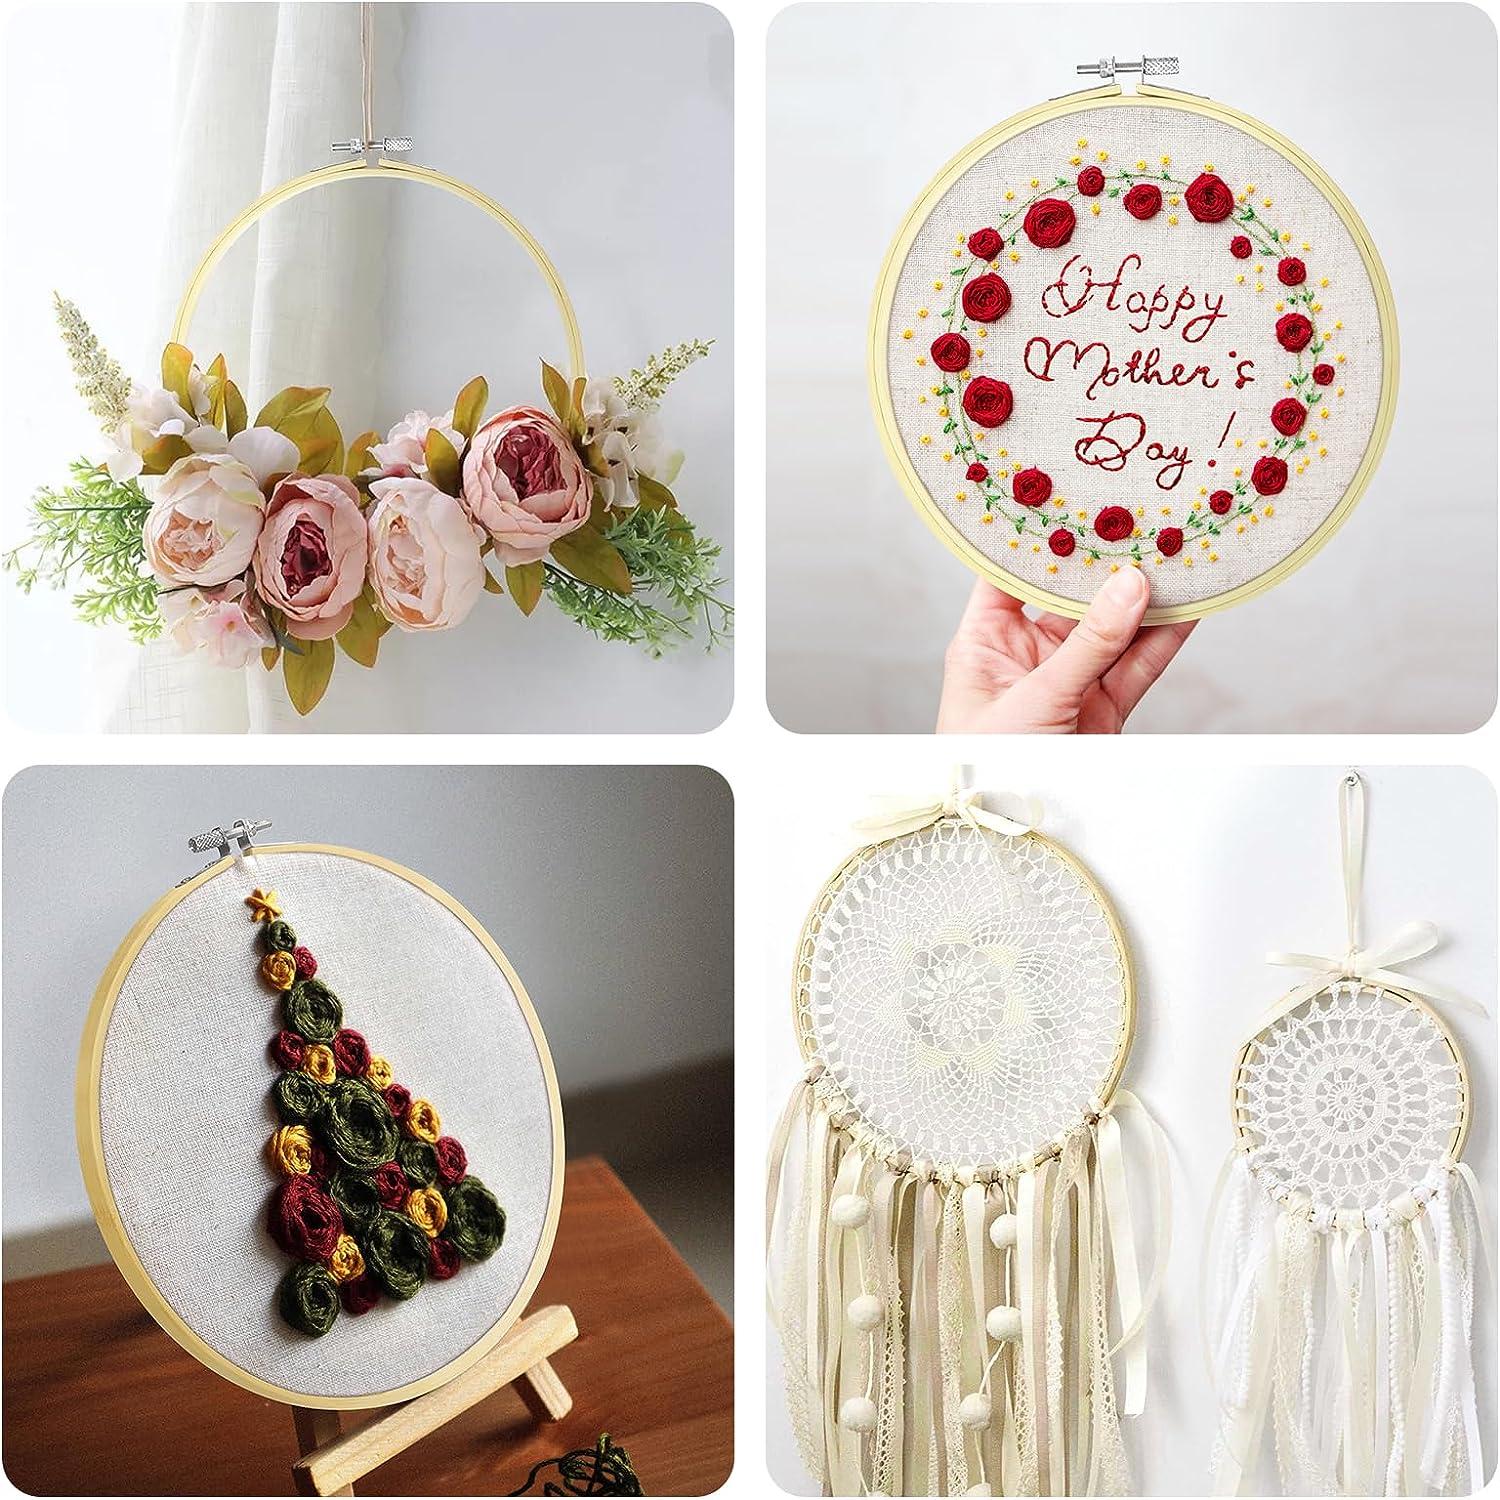 New 5 Size Bamboo Embroidery Hoop Round Loop Cross Stitch Hoop